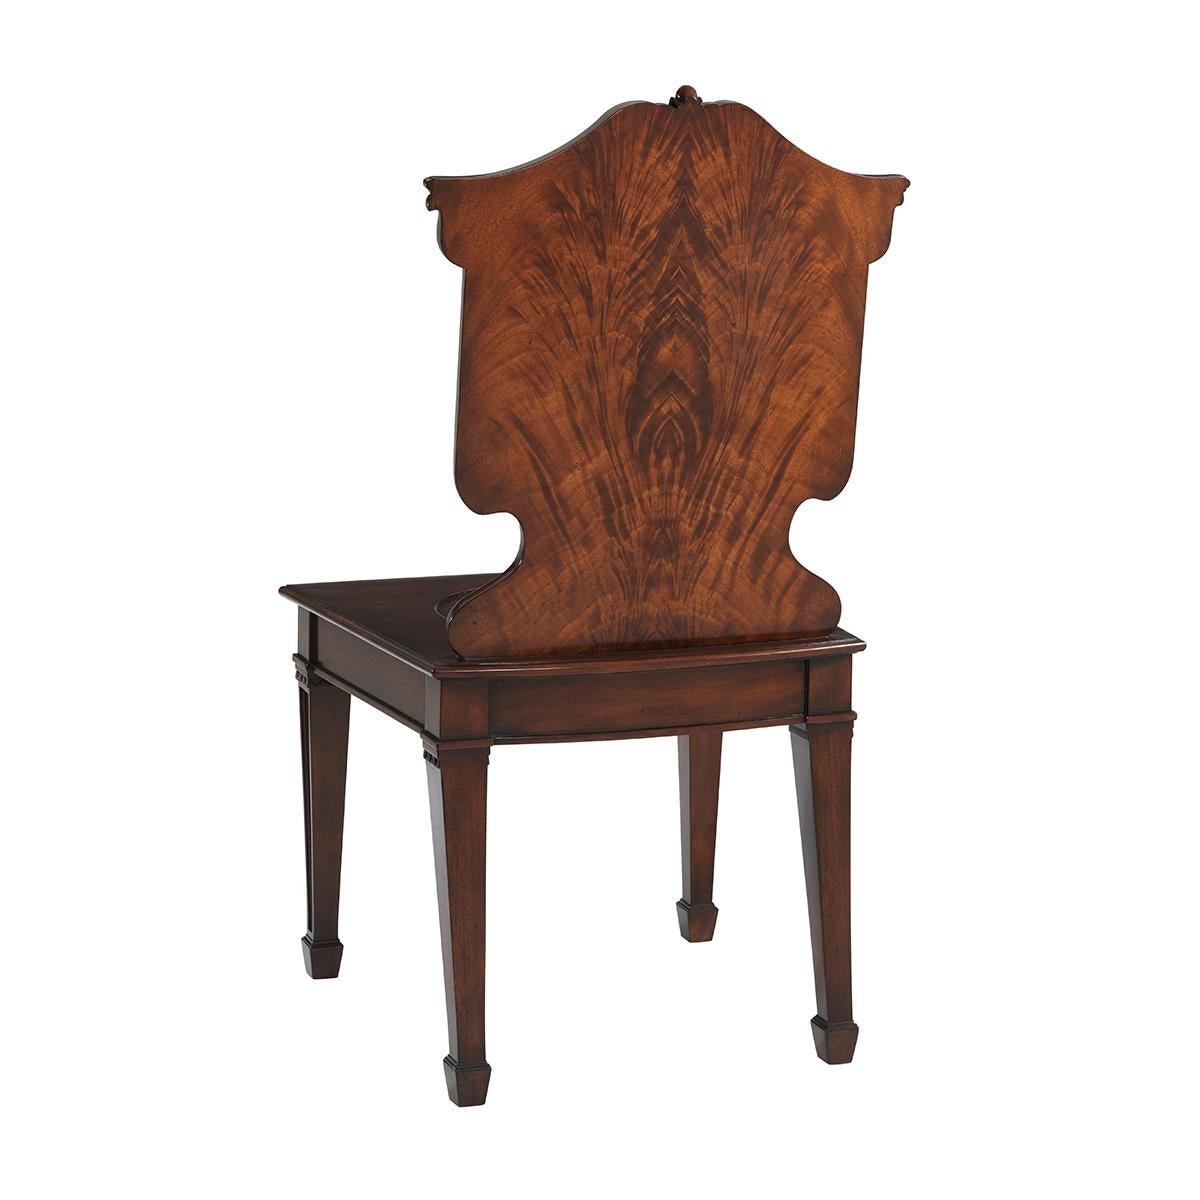 A finely carved mahogany chair, the arched cartouche backrest with carved acanthus leaf details centered by the hand-painted Spencer family crest, the solid seat above a swag carved seat rail on square tapering legs.

Dimensions: 20.5